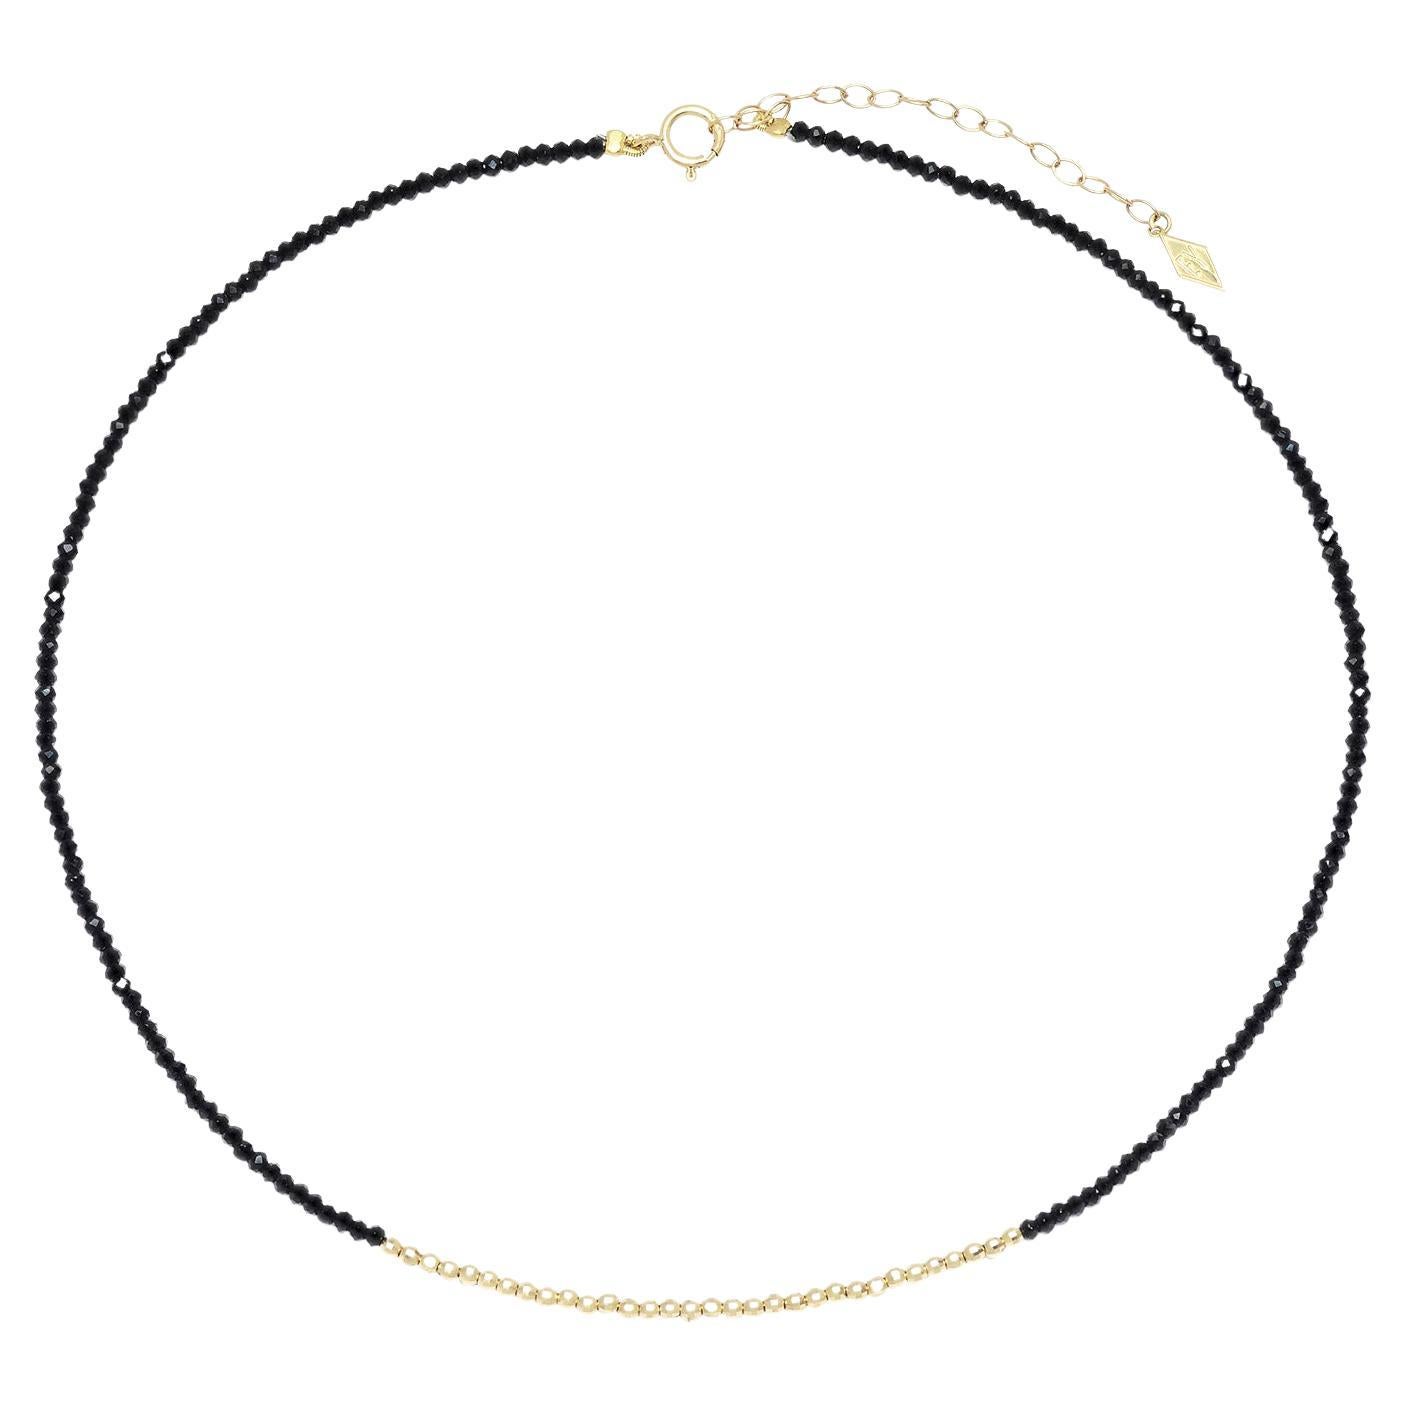 The "Glimmer Choker" with Yellow Gold and Spinel